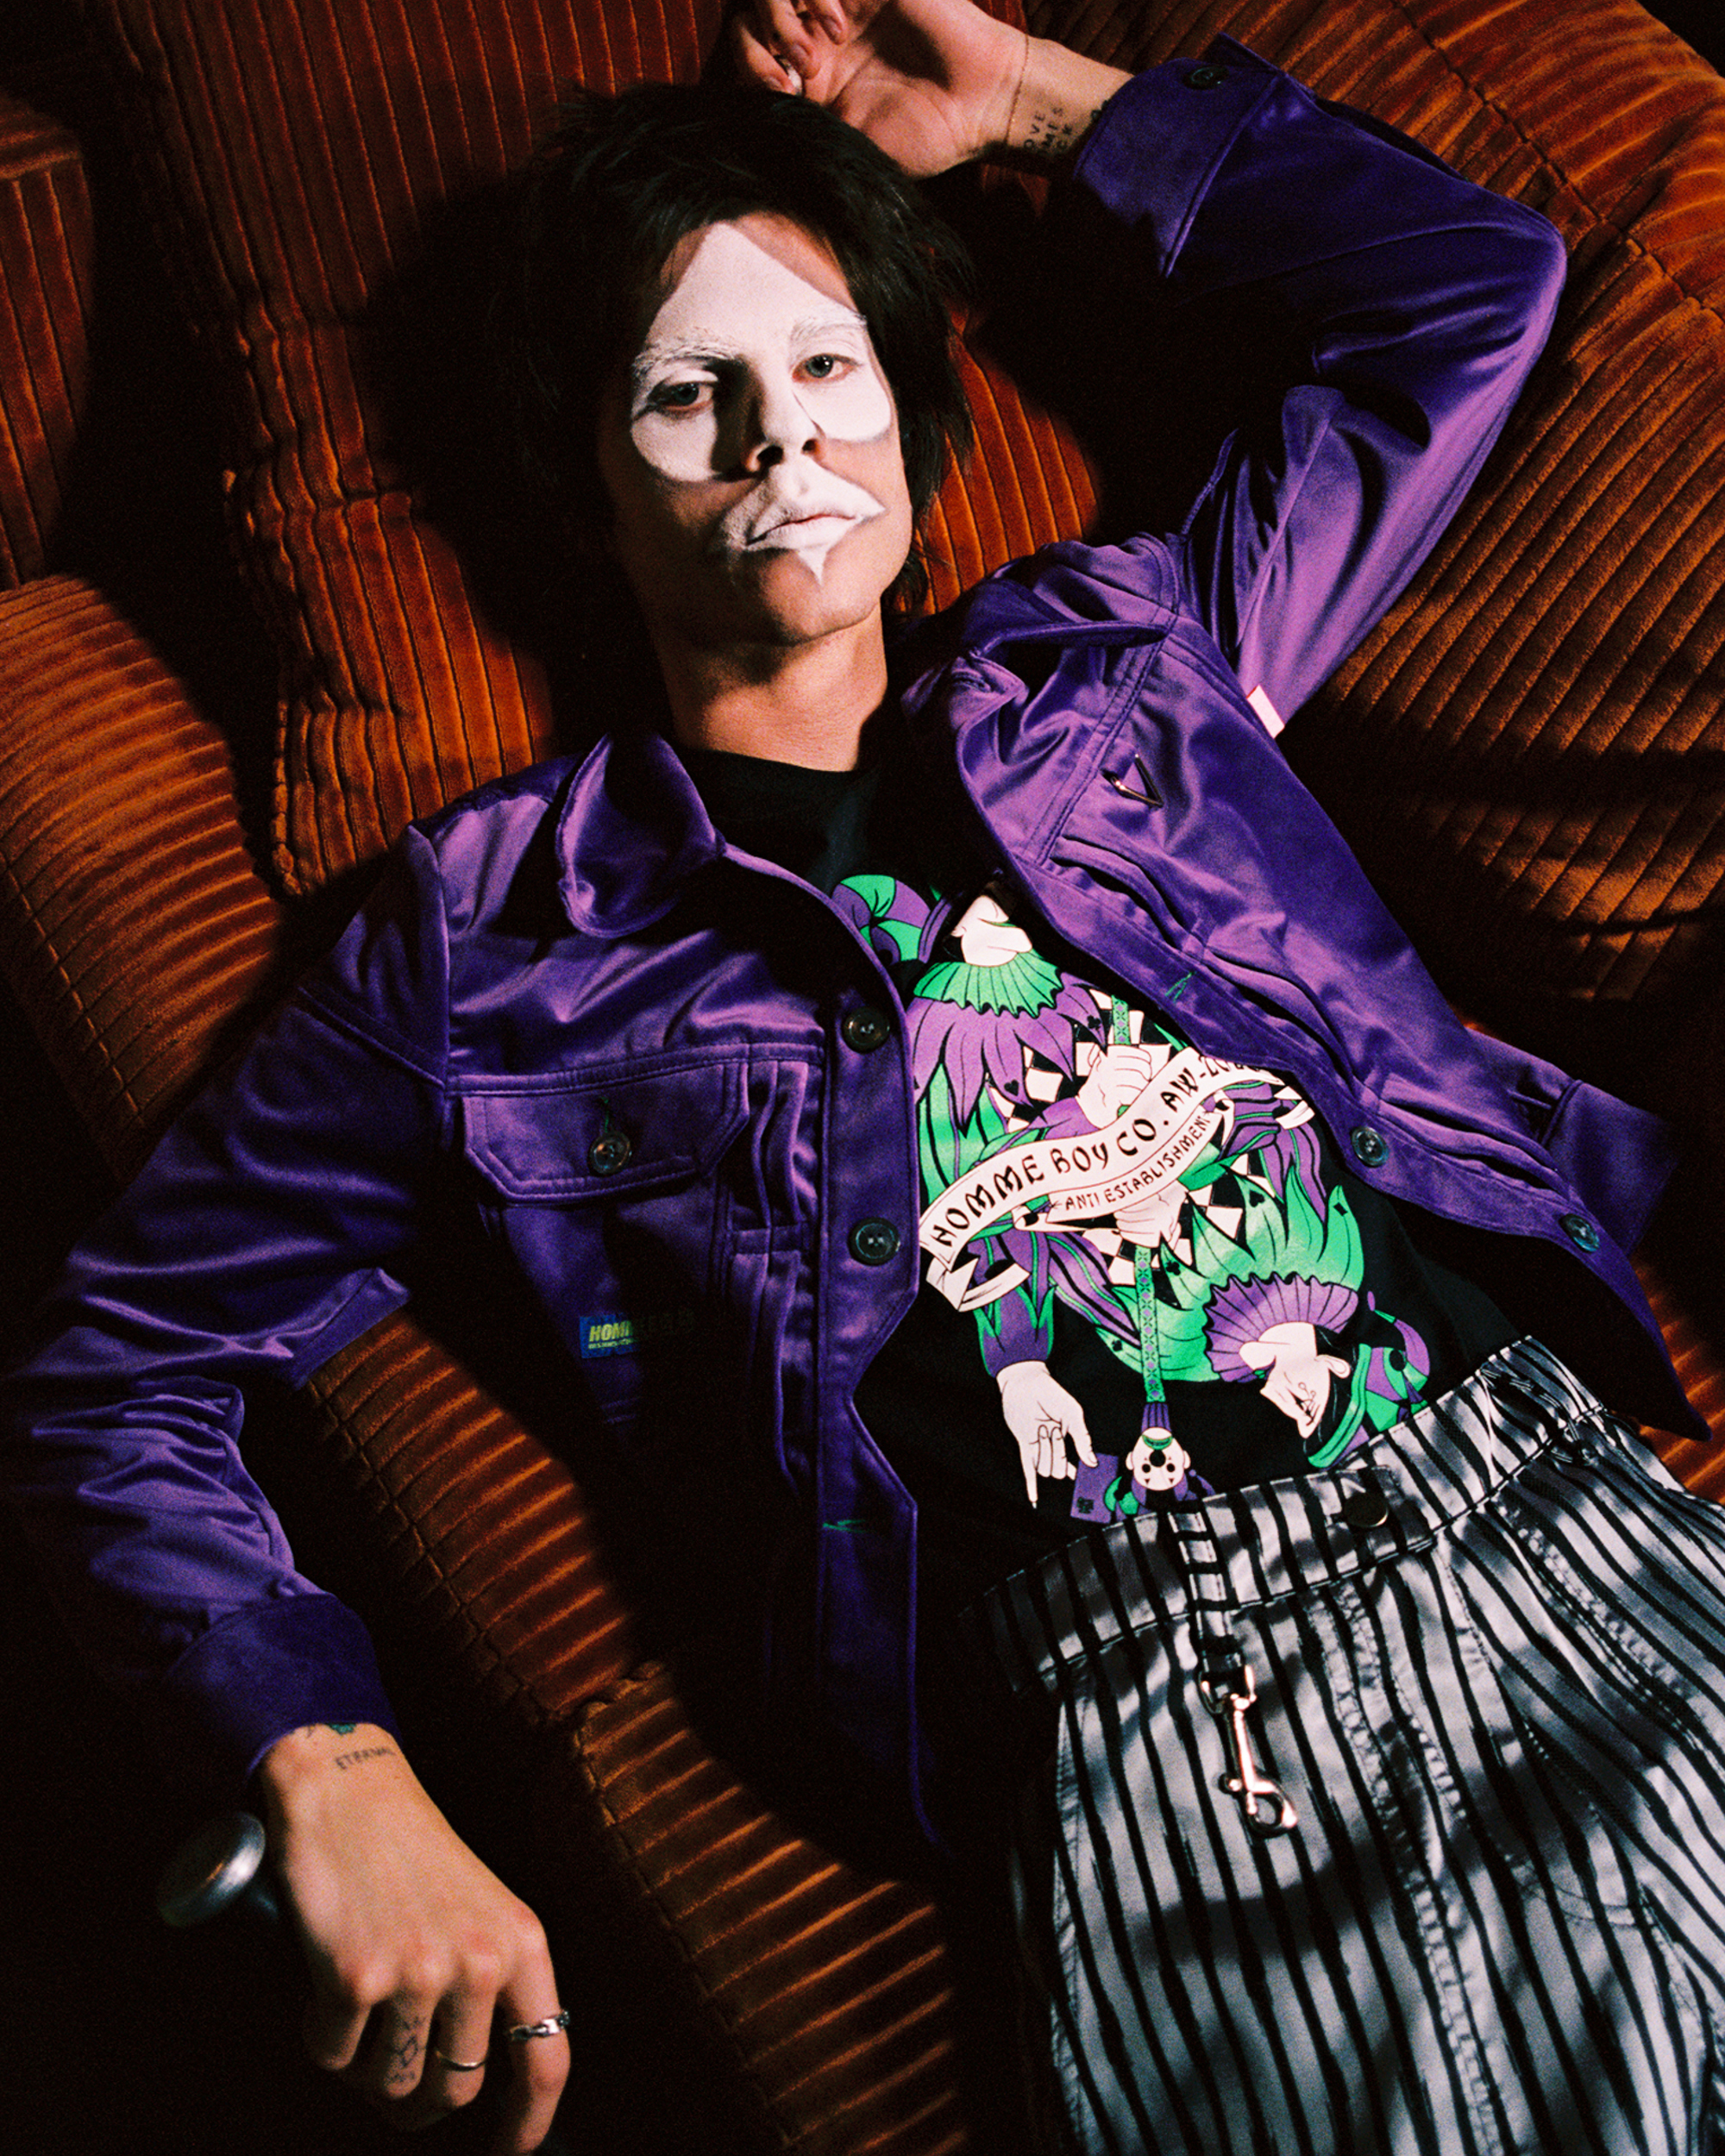 Model laying on a red couch with white spade shaped facepaint